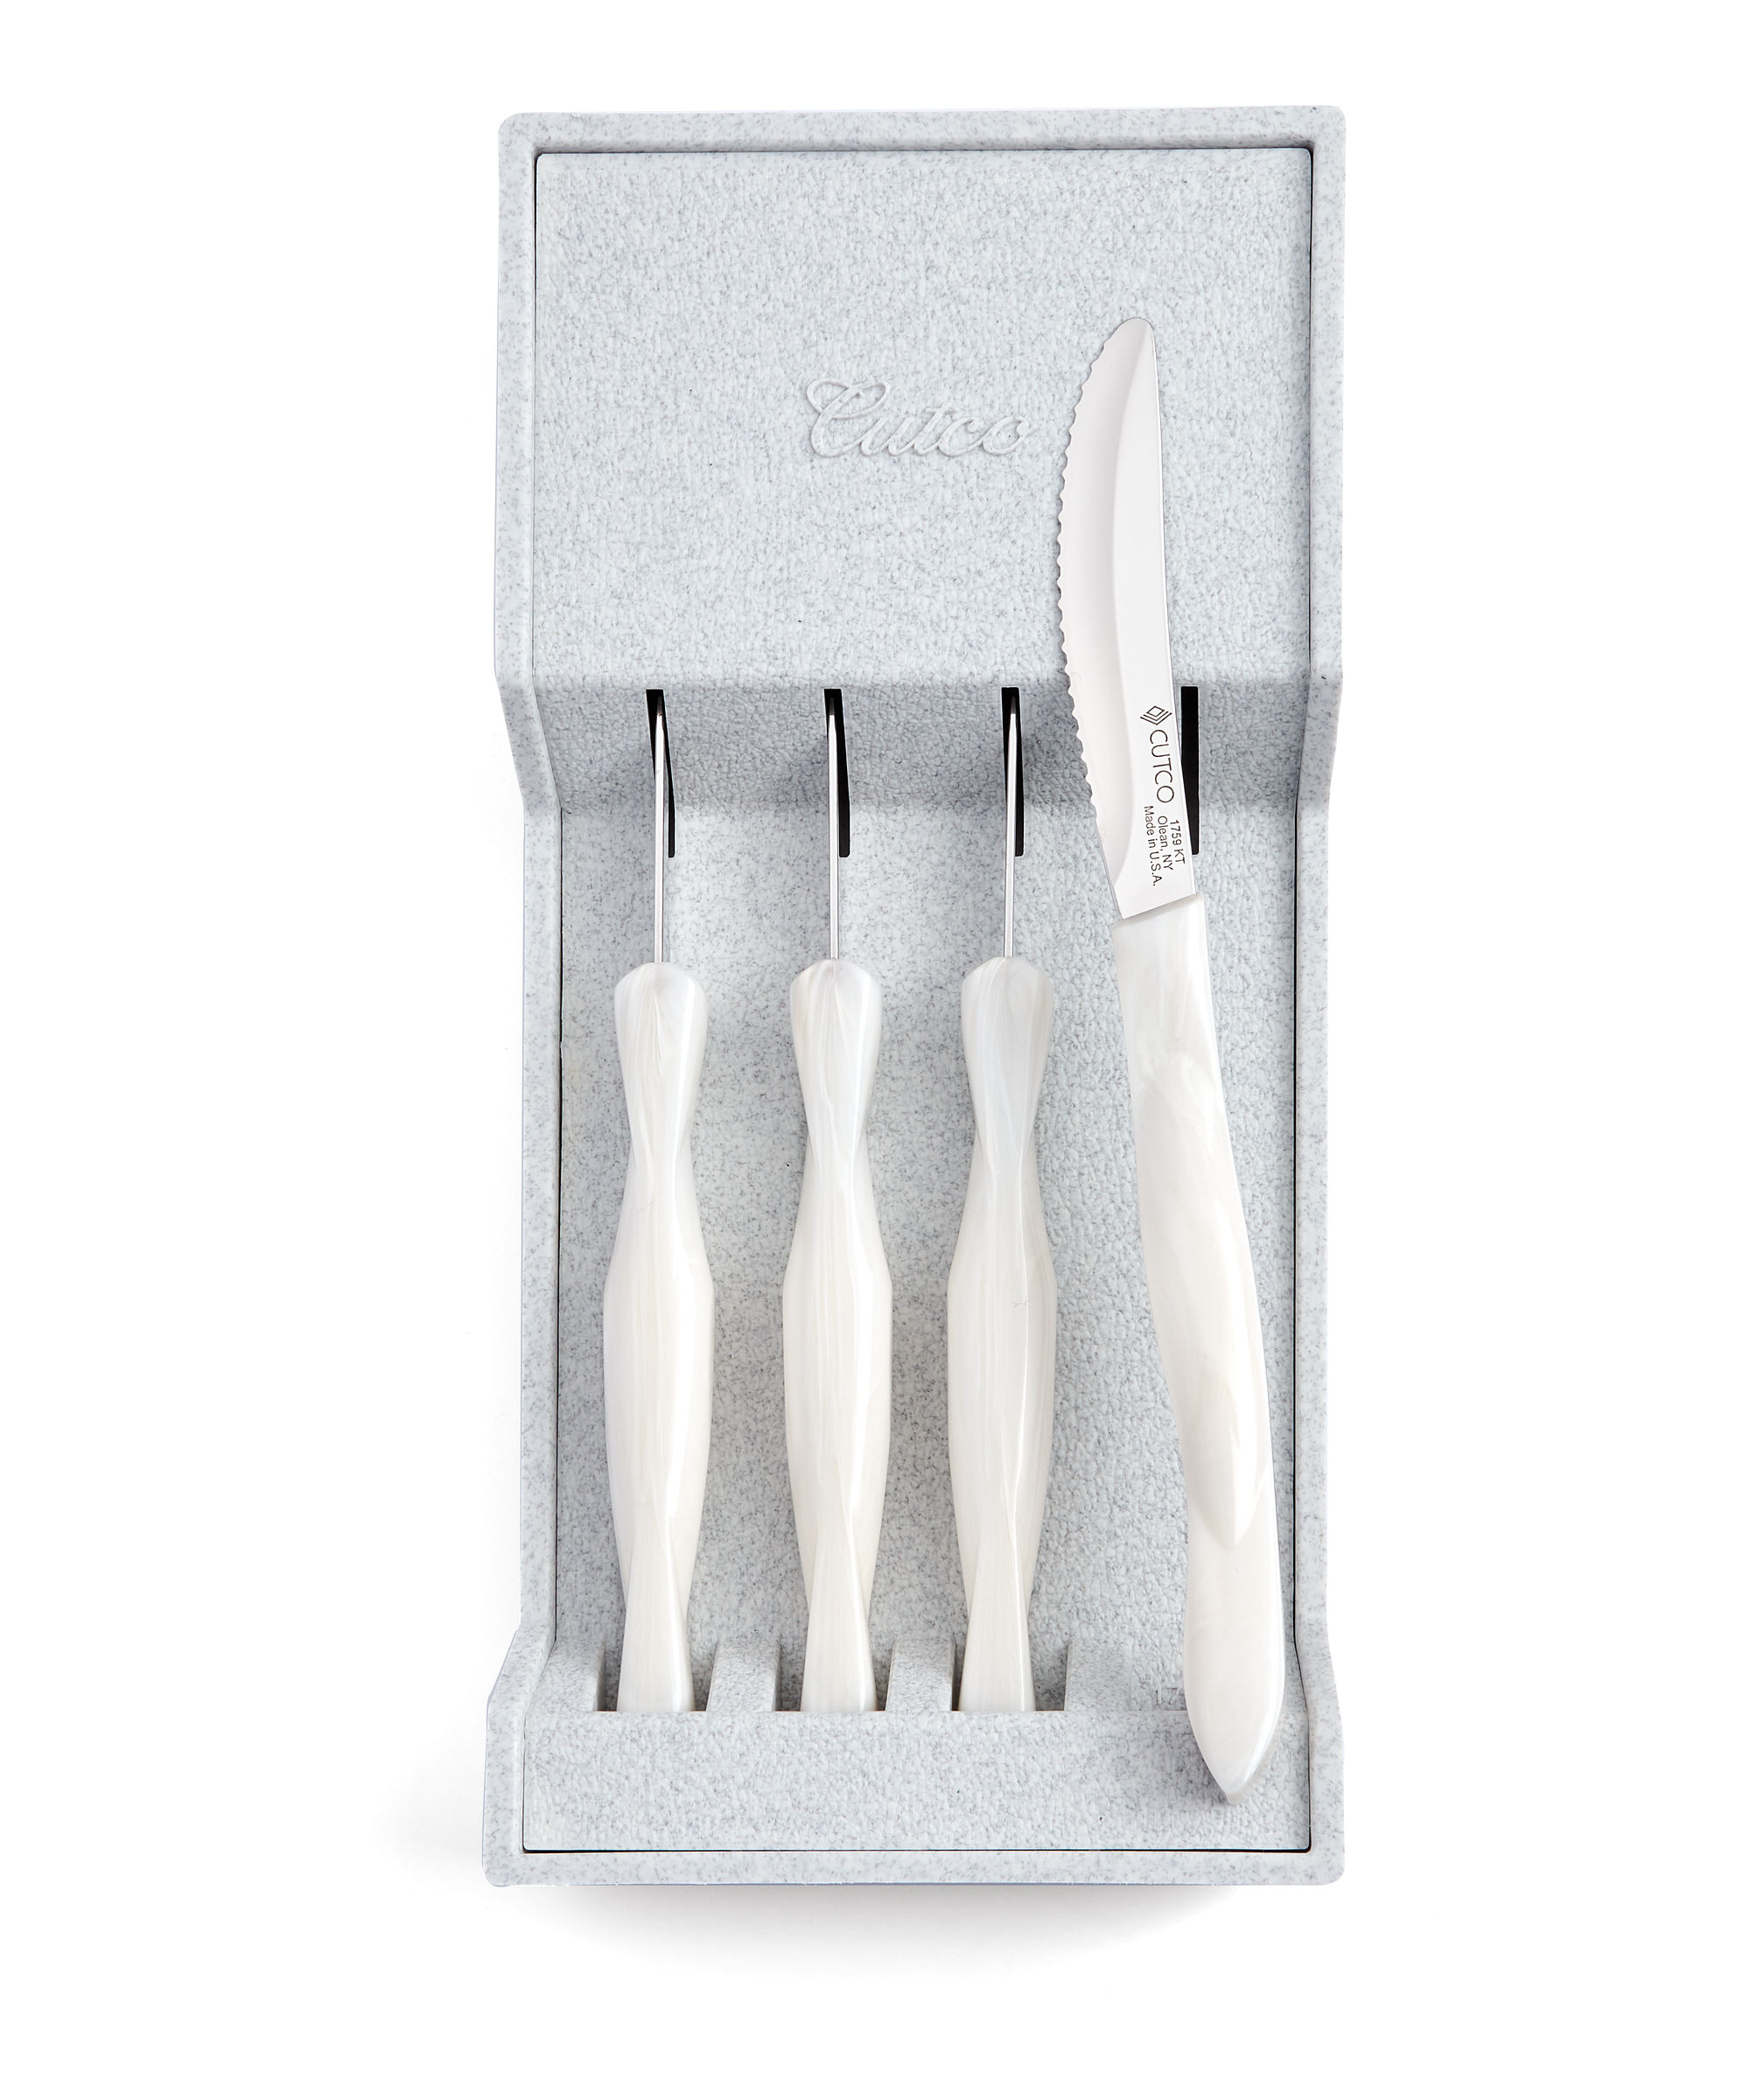 Cutco 4 Piece Table Knife Set Giveaway: Day 2